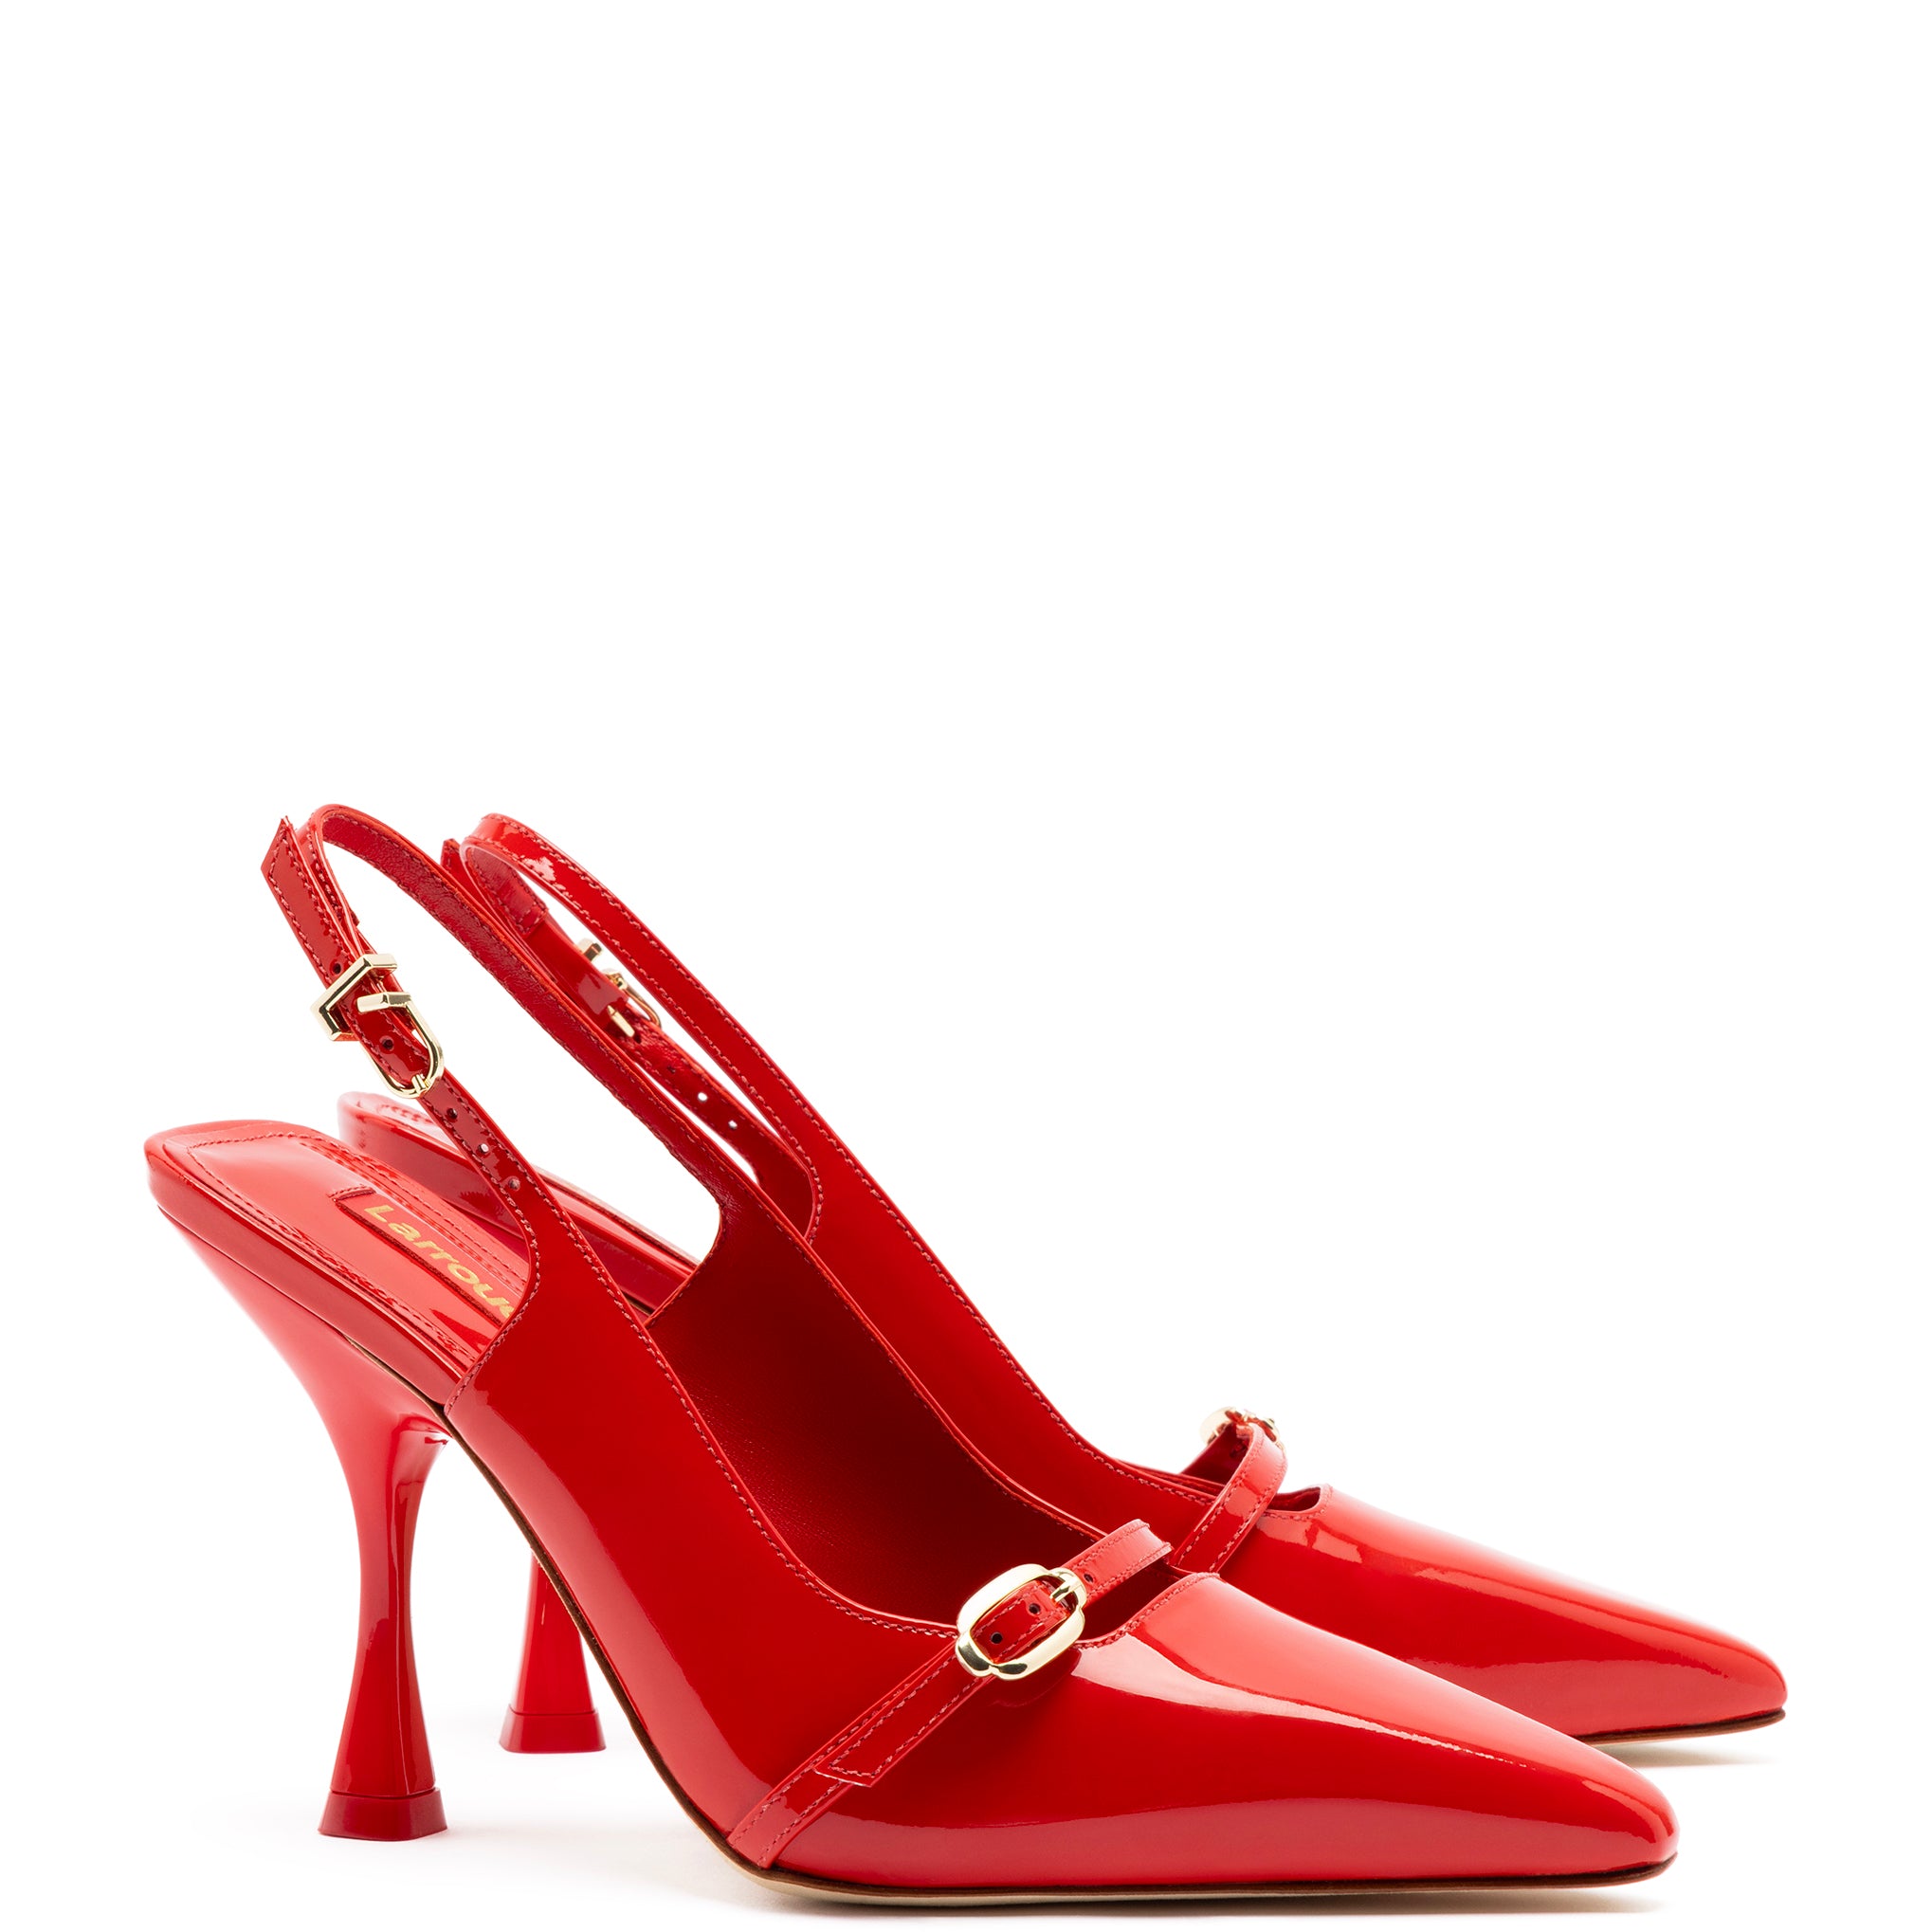 Ines Hi in Scarlet Patent Leather